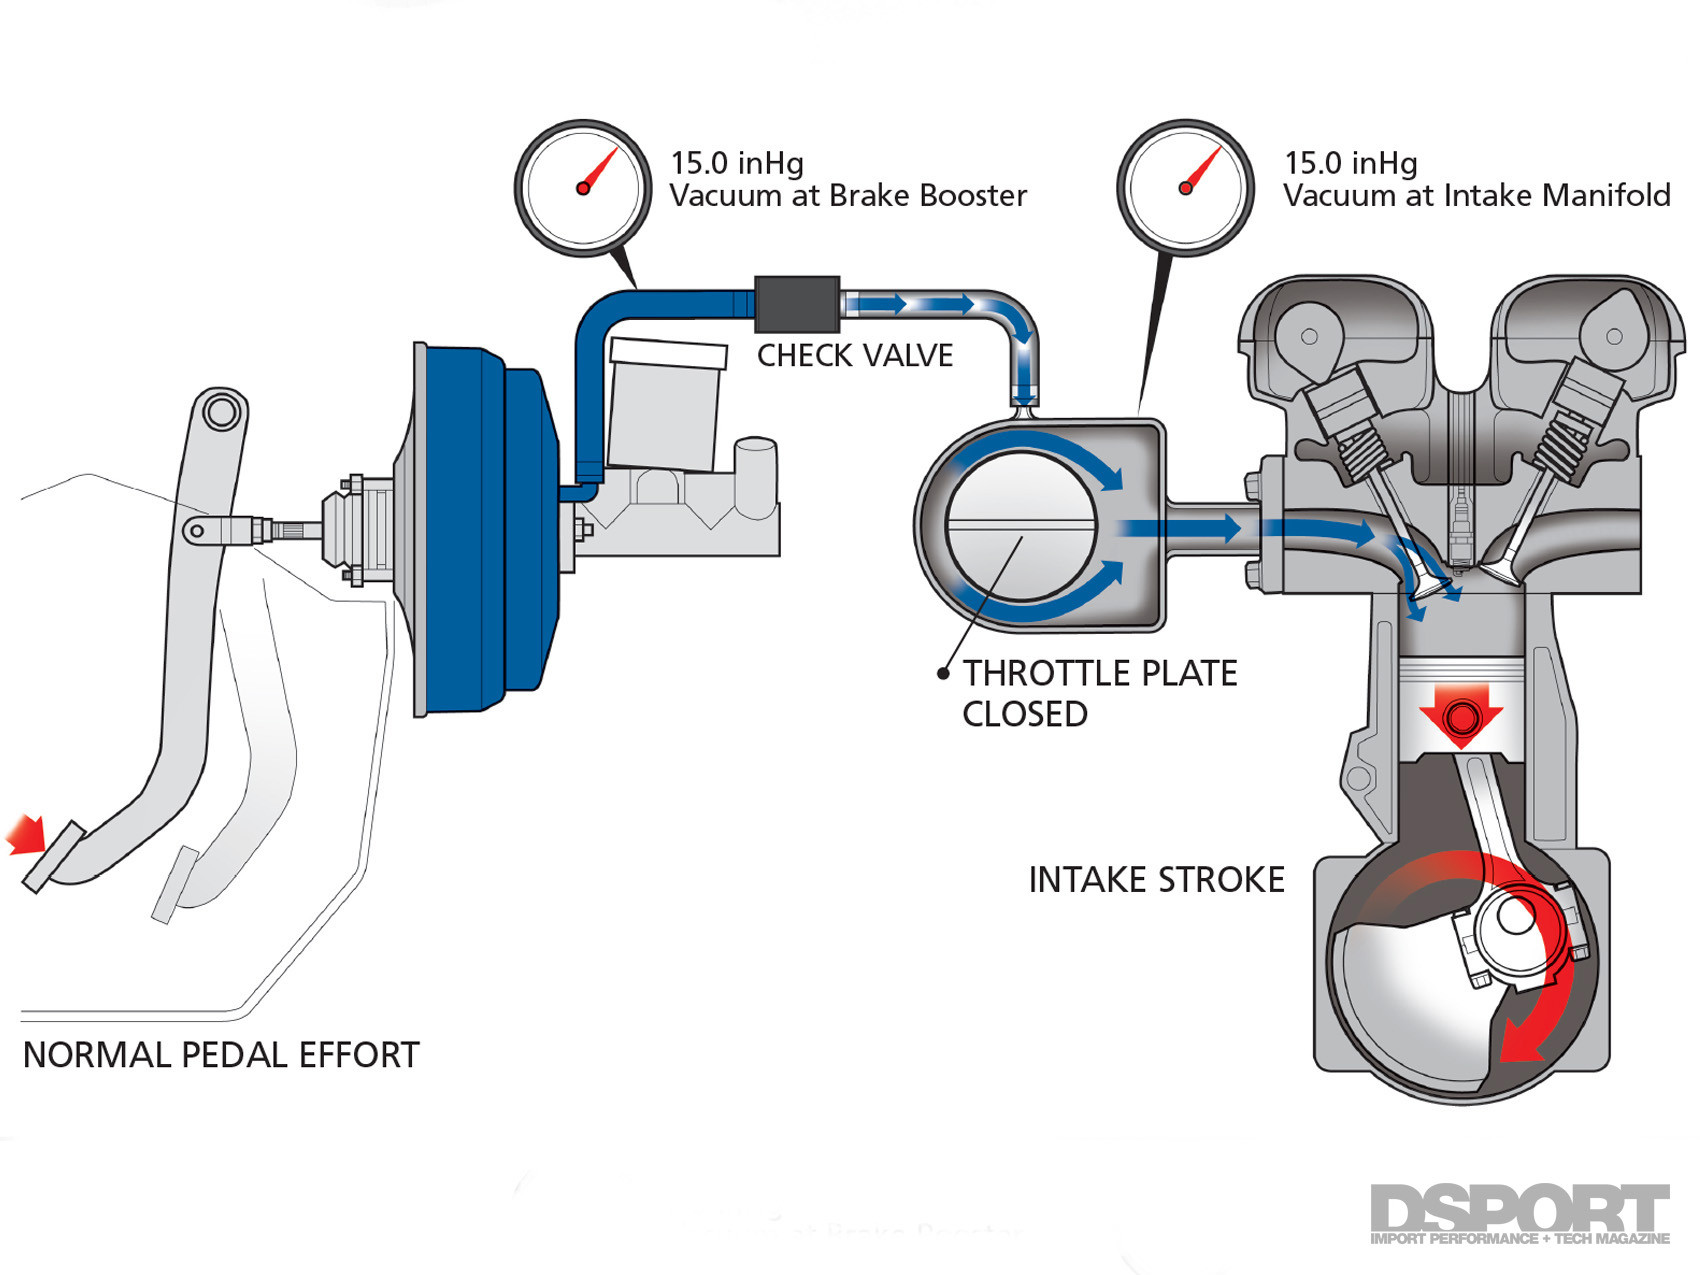 Brake Booster Vacuum Pump Installation Diagram Comp Cams Vacuum Canister – Page 2 Of 3 – Dsport Magazine Of Brake Booster Vacuum Pump Installation Diagram